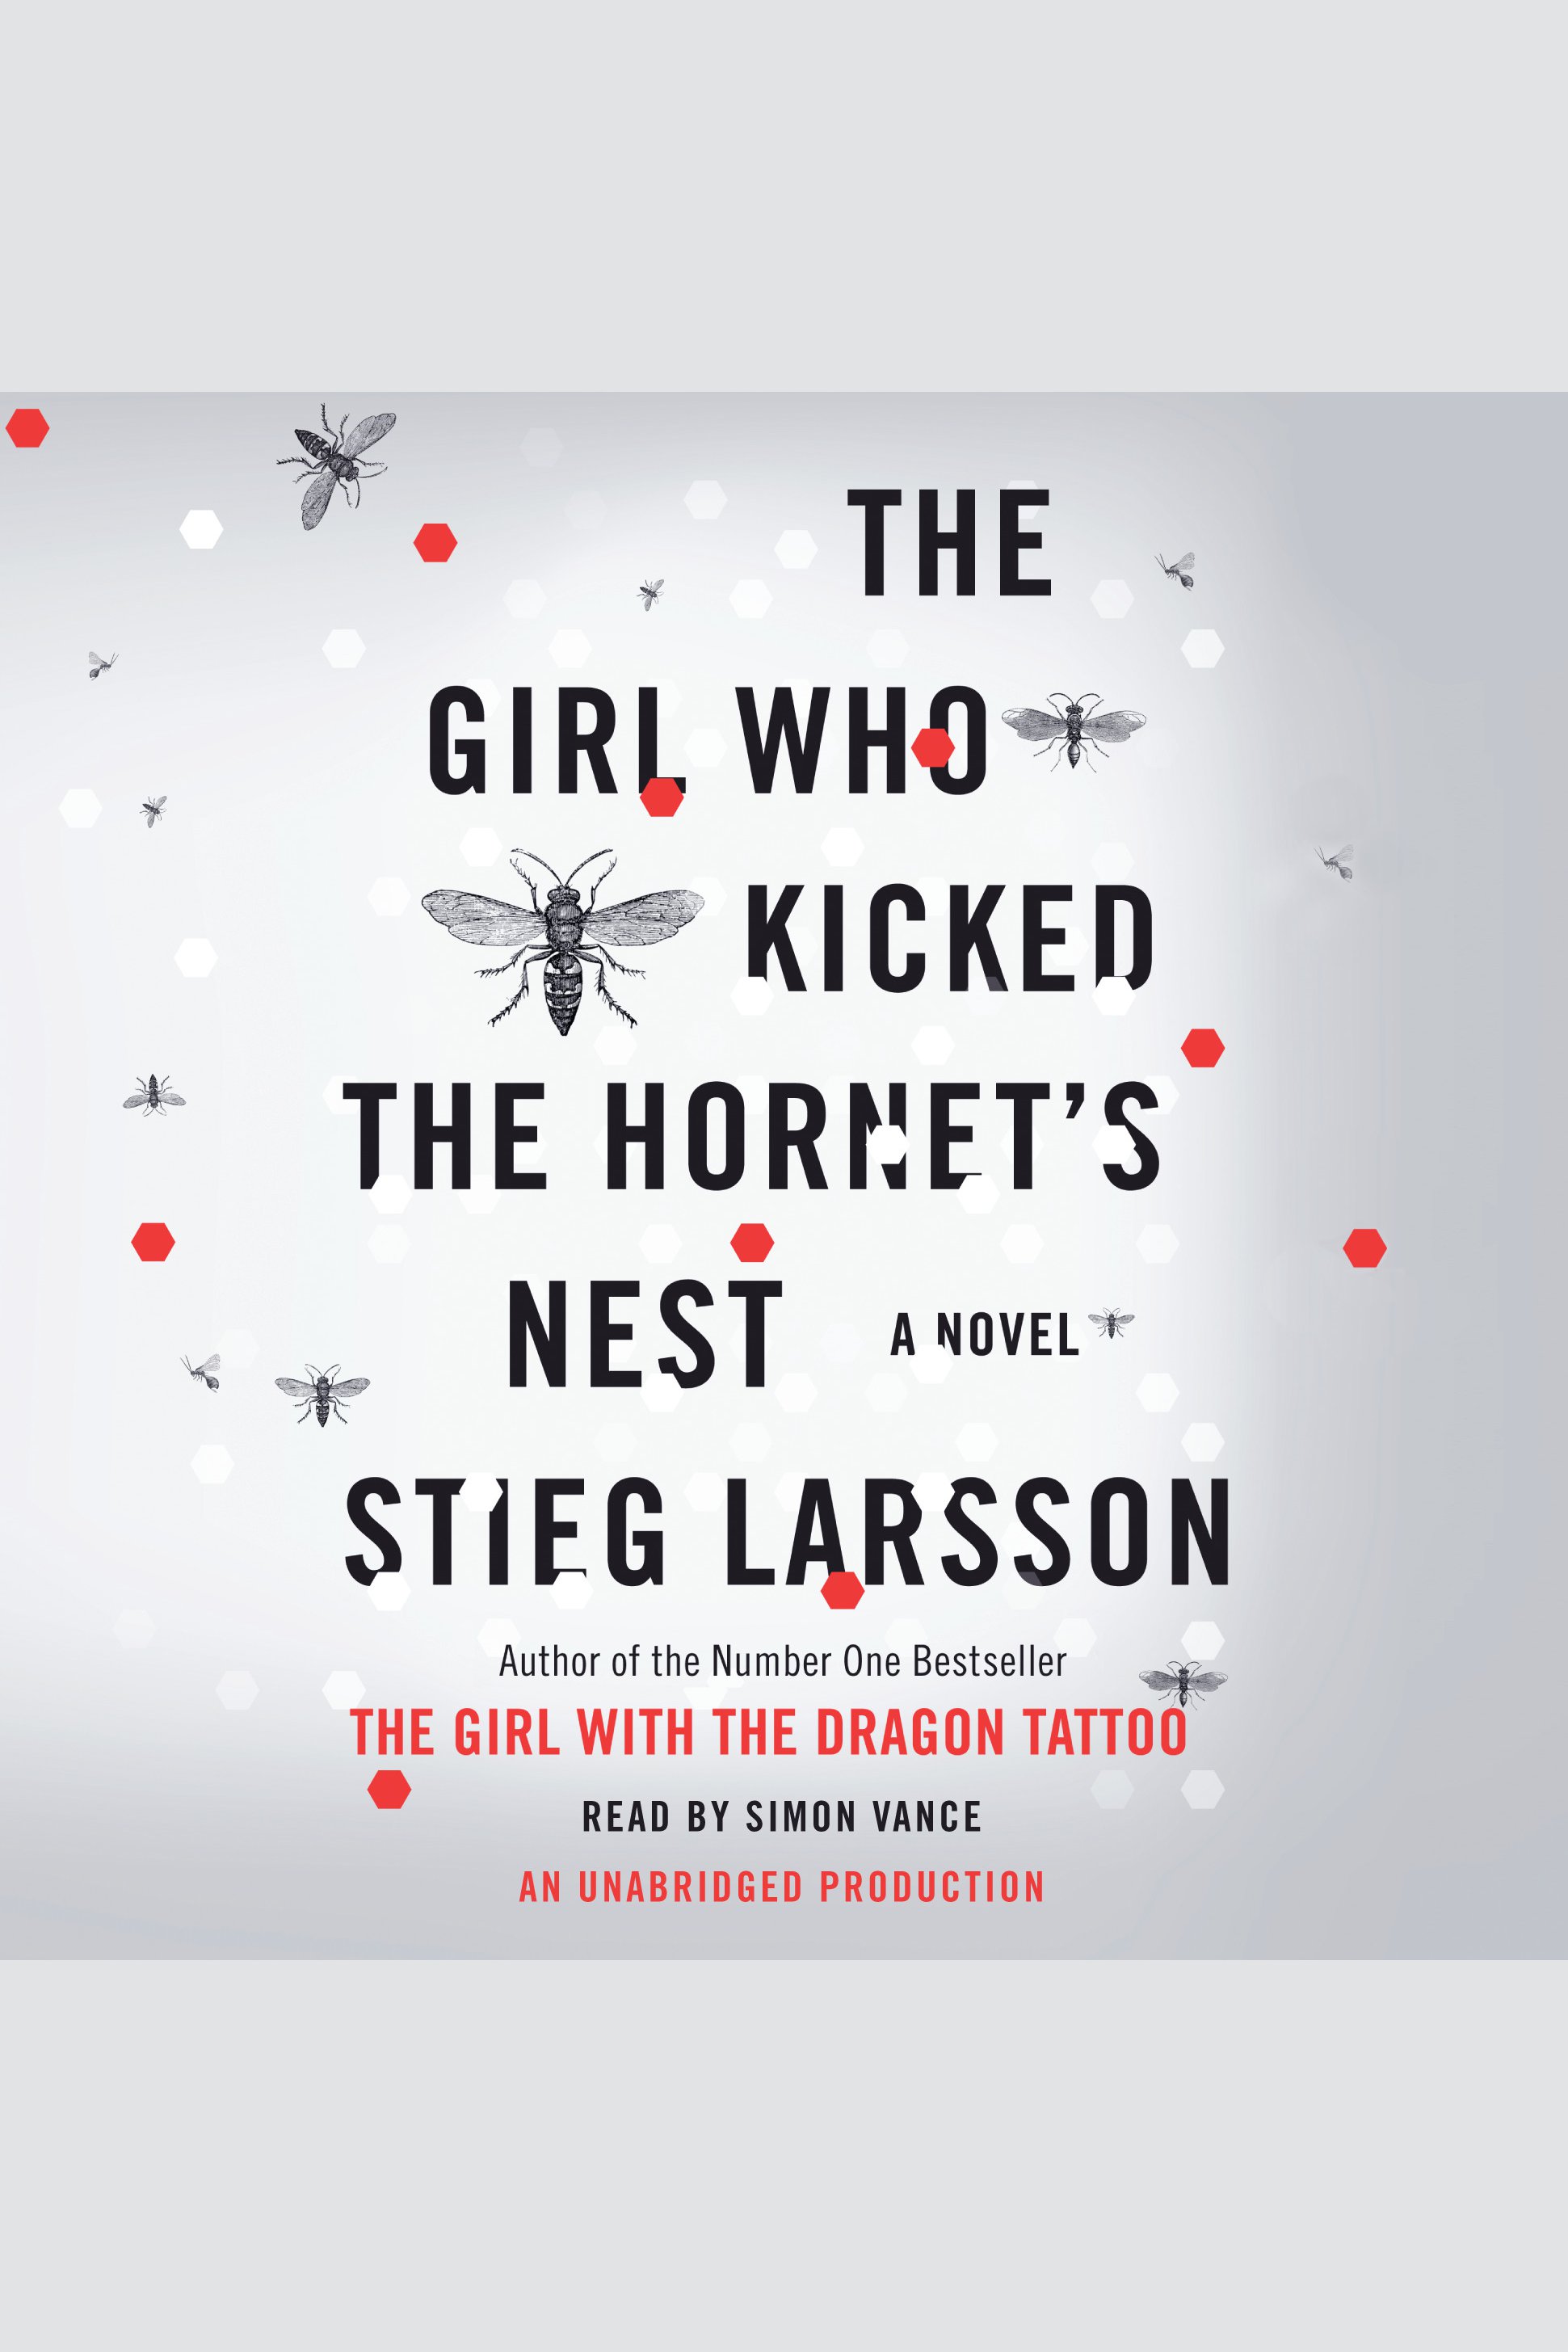 The girl who kicked the hornet's nest cover image